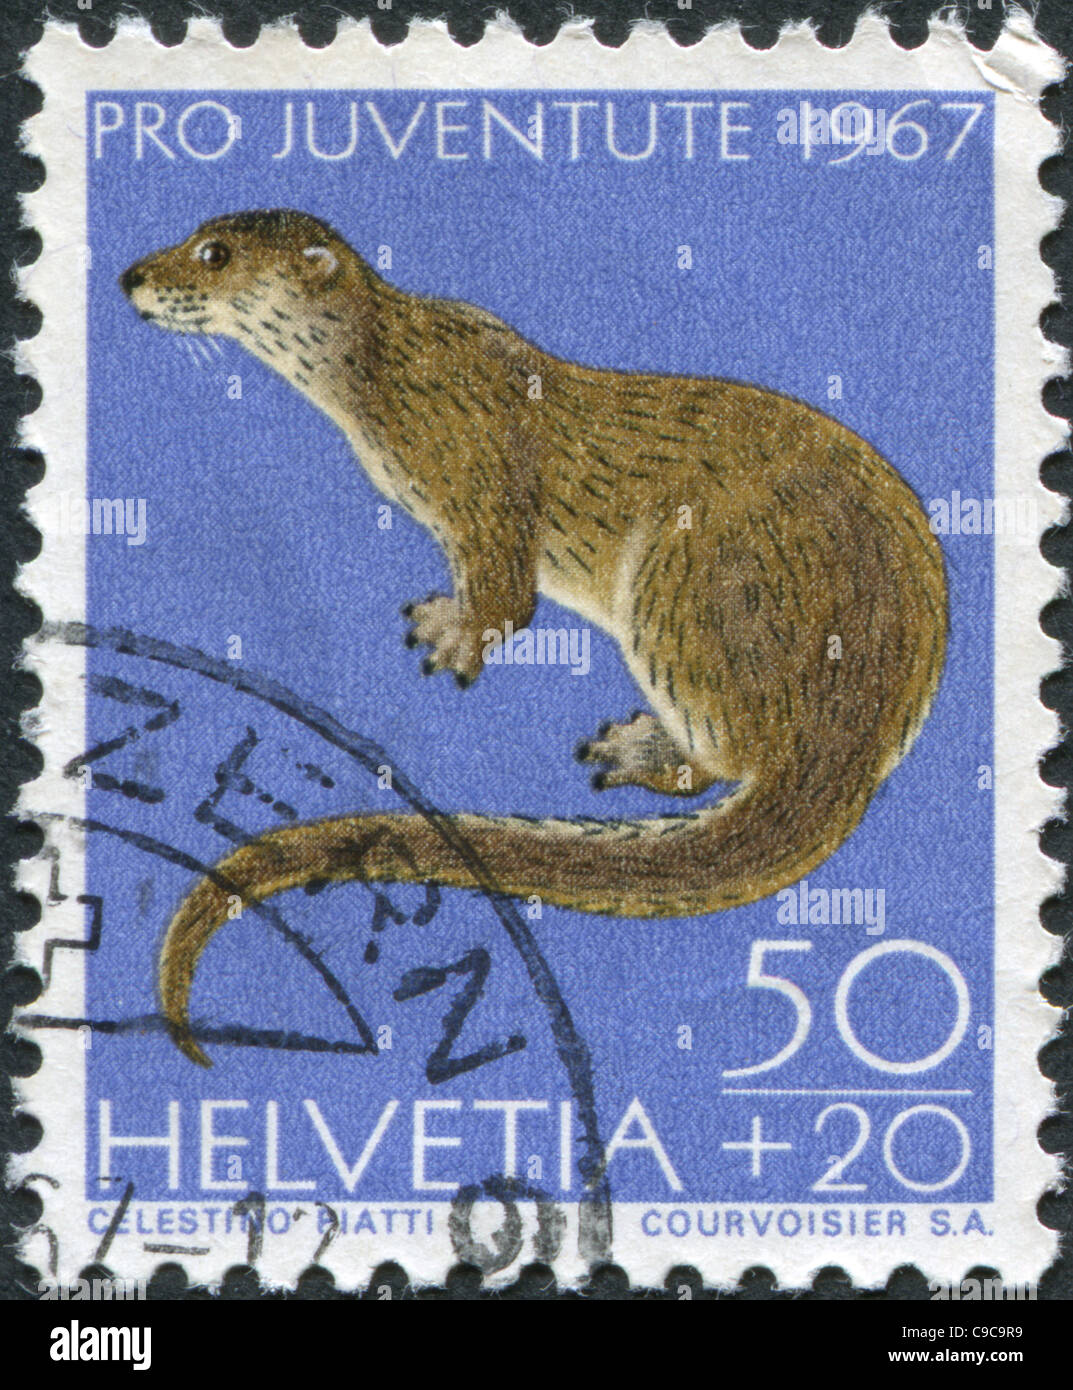 SWITZERLAND 1967: A stamp printed in Switzerland, shows the European Otter (Lutra lutra) Stock Photo